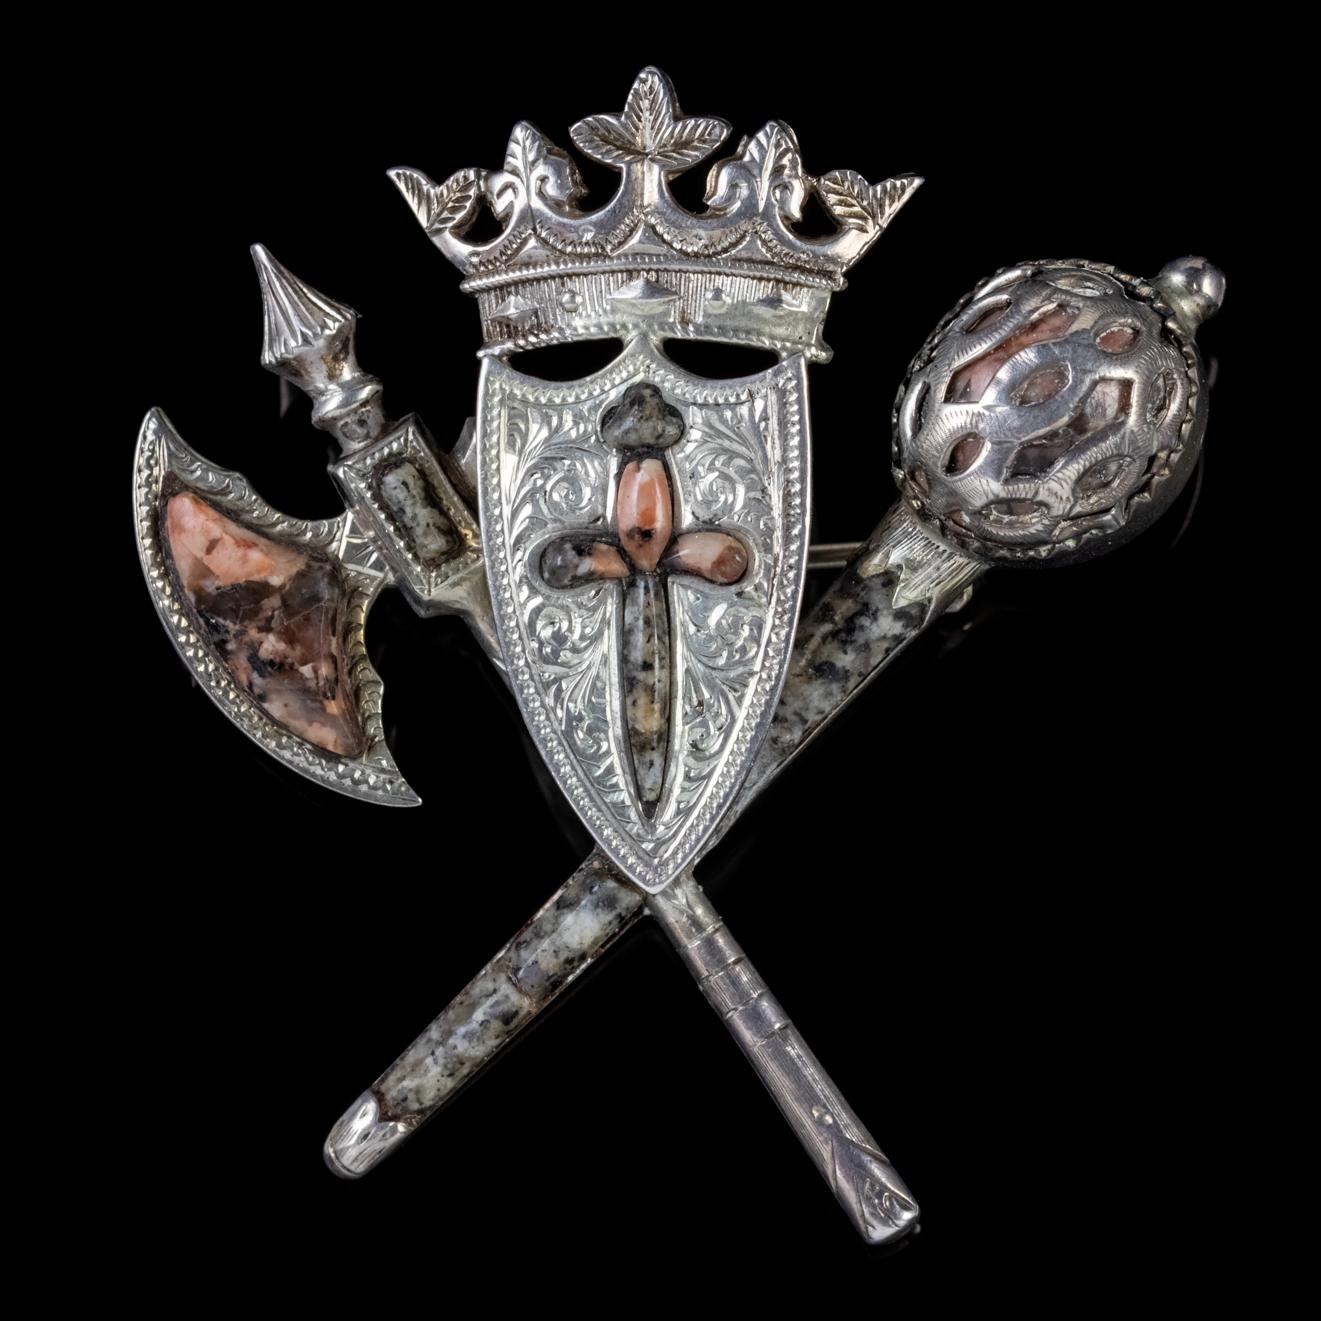 A wonderful Antique Victorian Scottish brooch featuring an engraved shield adorned with a sword, topped with a crown with a crossed axe and sword behind. 

Scottish Granite stones have also been cut and placed to decorate the brooch and have lovely